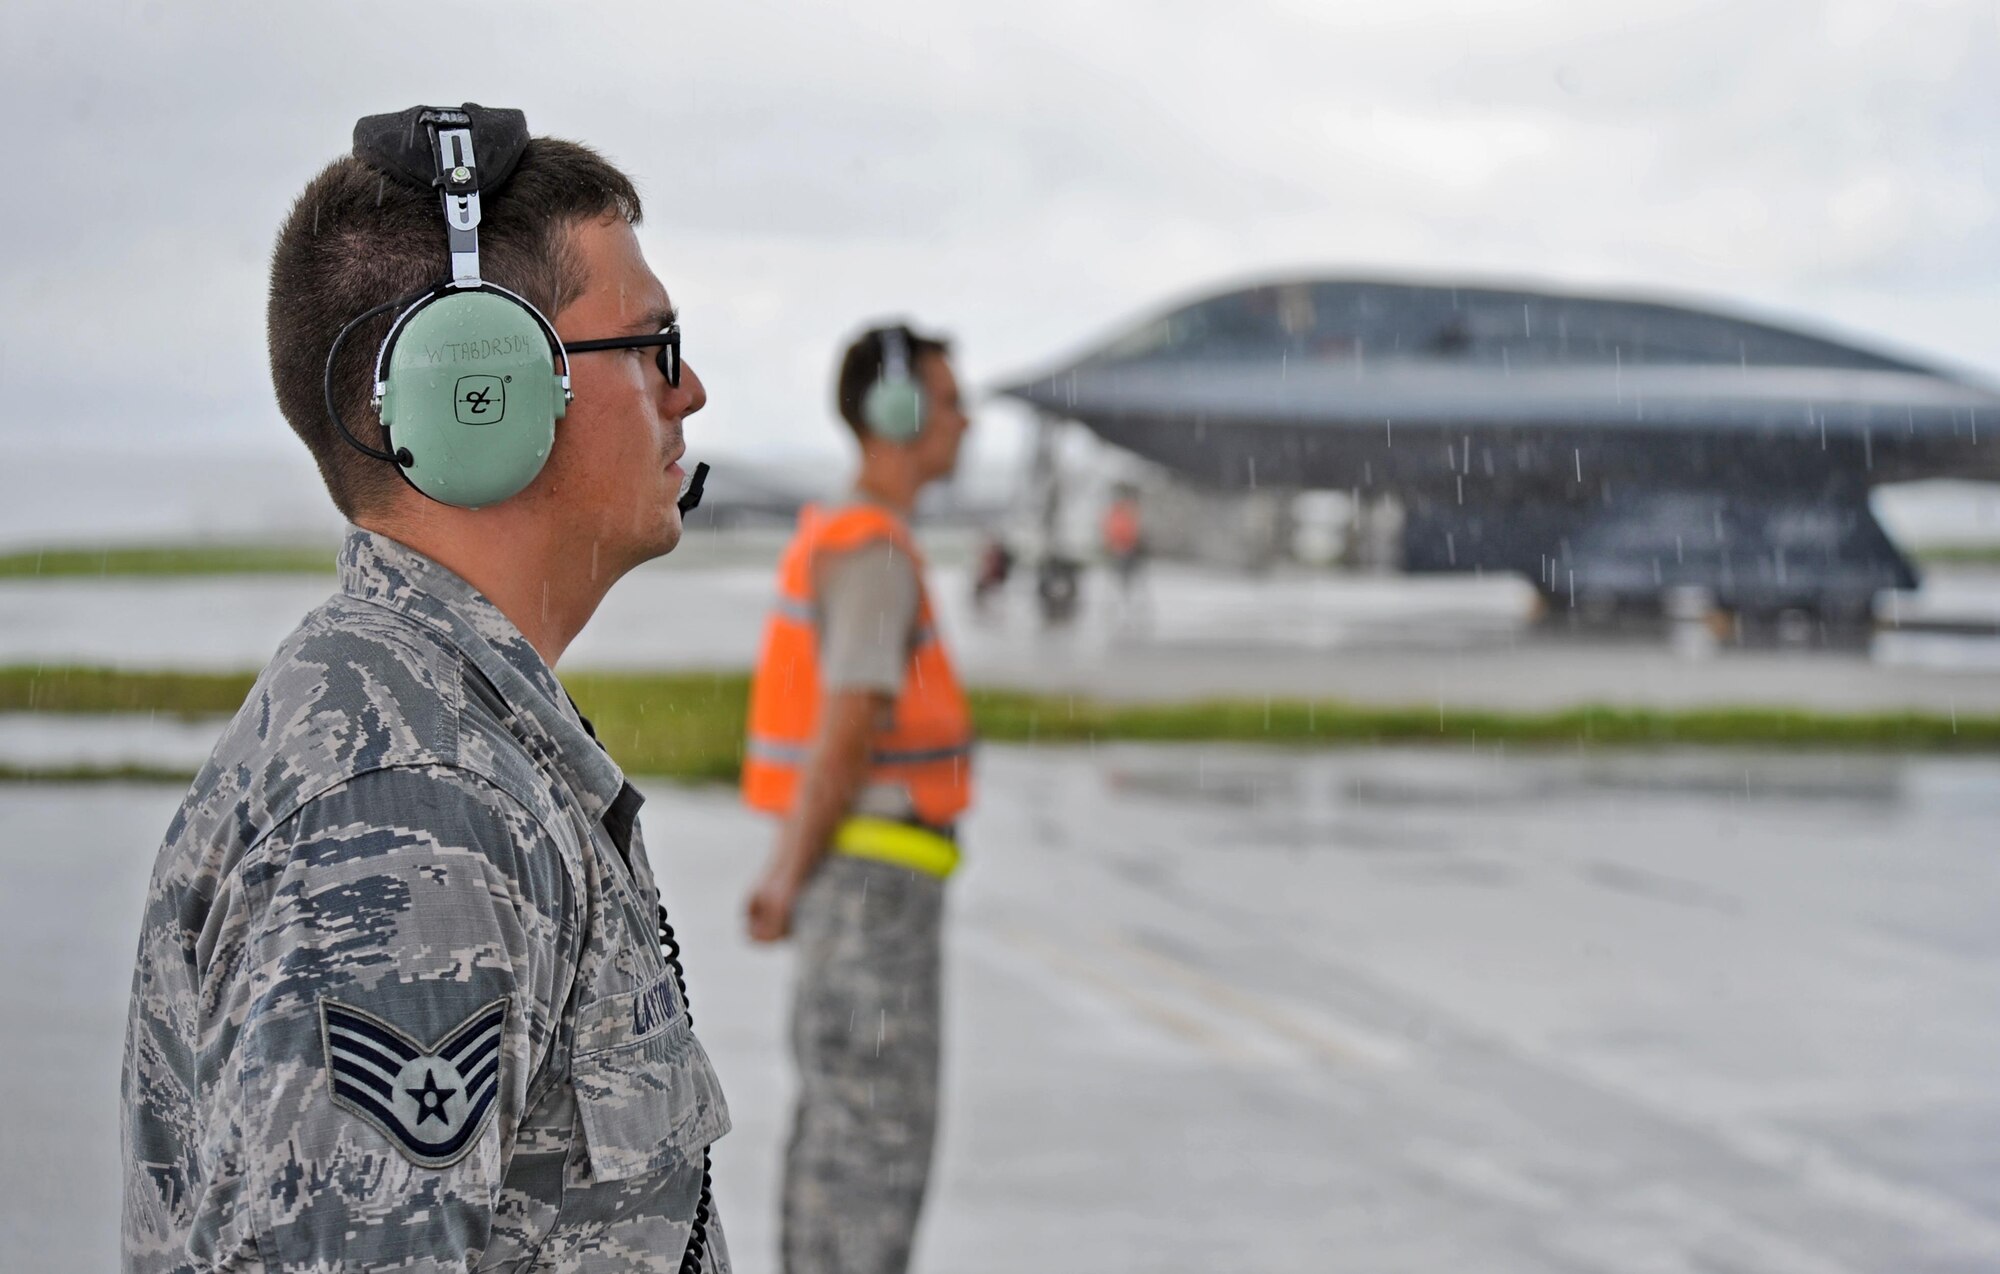 U.S. Air Force Staff Sgt. Joshua Layton (left), an assistant dedicated crew chief, and Staff Sgt. Matthew Helms, a dedicated crew chief, both assigned to the 509th Aircraft Maintenance Squadron, communicate pre-flight instructions with a B-2 Spirit pilot prior to take off at Andersen Air Force Base, Guam, Aug. 11, 2016. More than 200 Airmen and three B-2s deployed from Whiteman Air Force Base, Mo., to conduct local sorties and regional training and integrate with regional allies in support of Bomber Assurance and Deterrence missions. (U.S. Air Force photo by Tech. Sgt. Miguel Lara III)